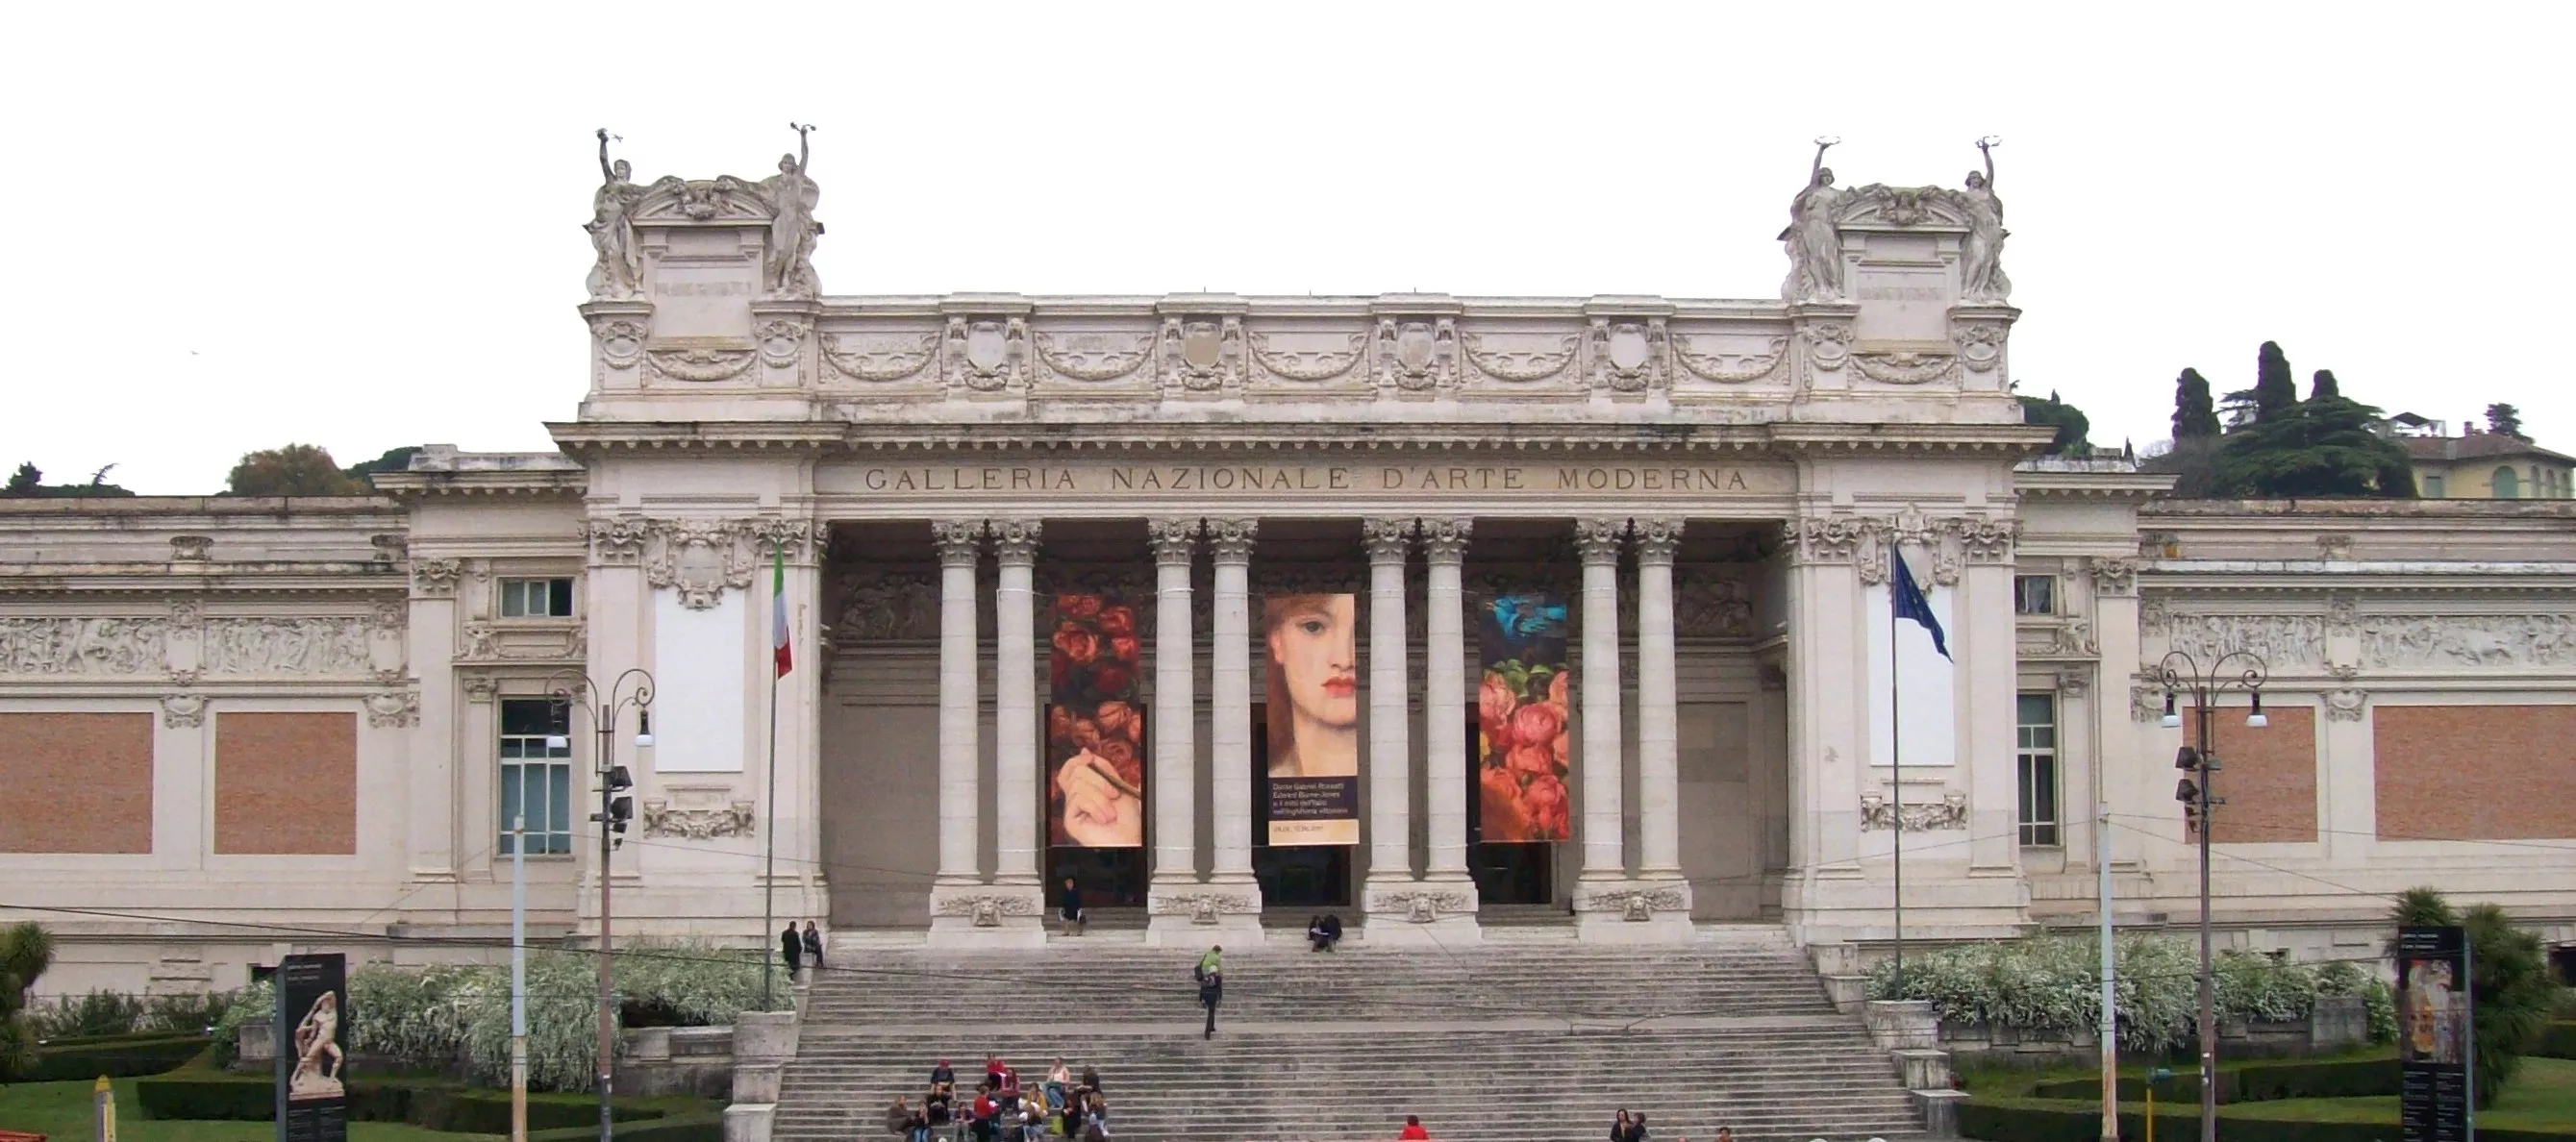 National Gallery of Contemporary Art in Italy, Europe | Museums - Rated 3.7